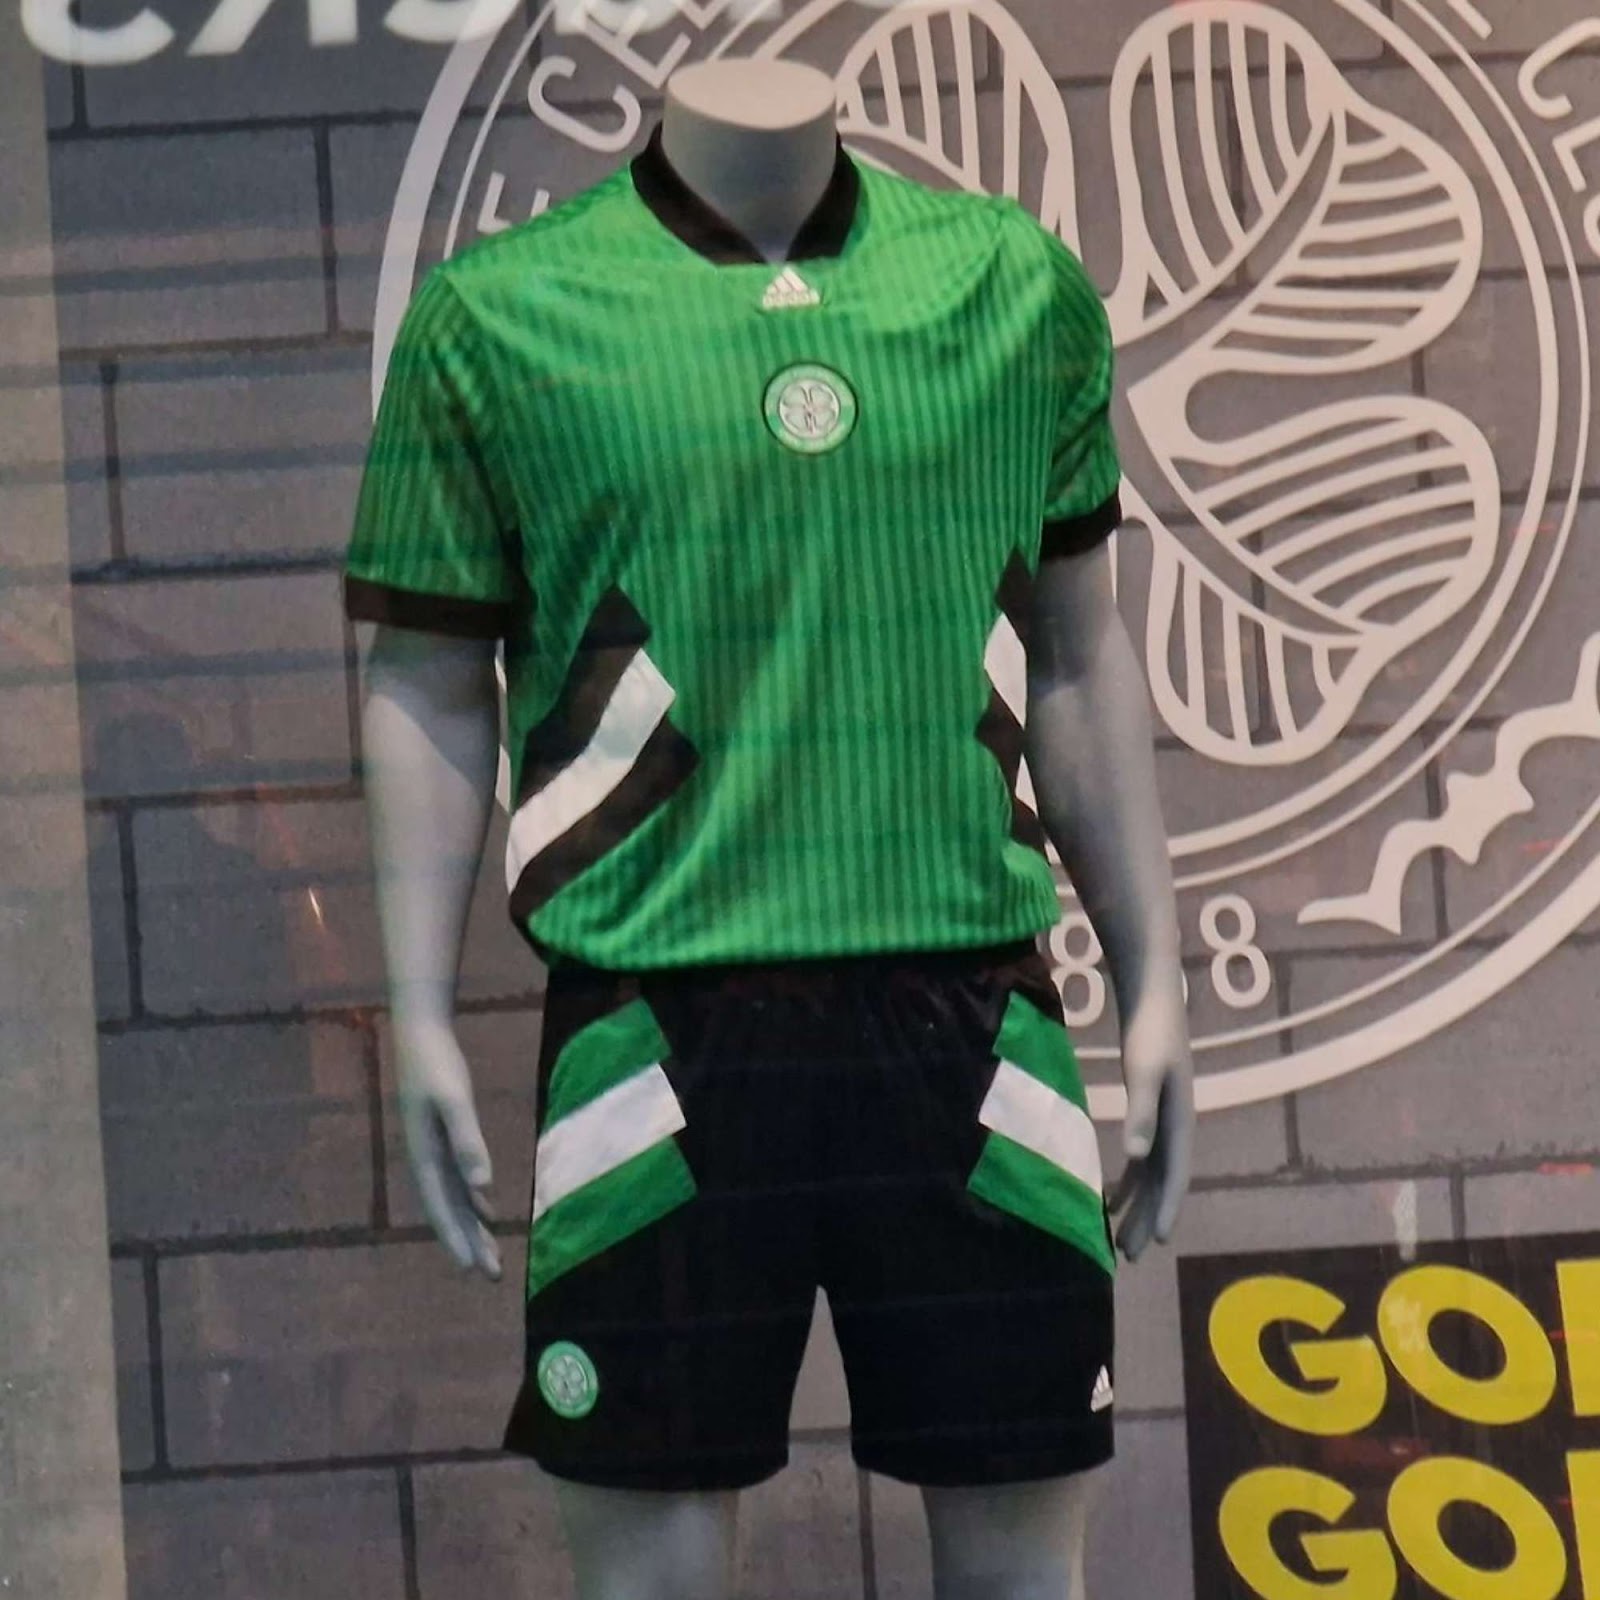 Classic Celtic football shirts: Vintage kits through the years